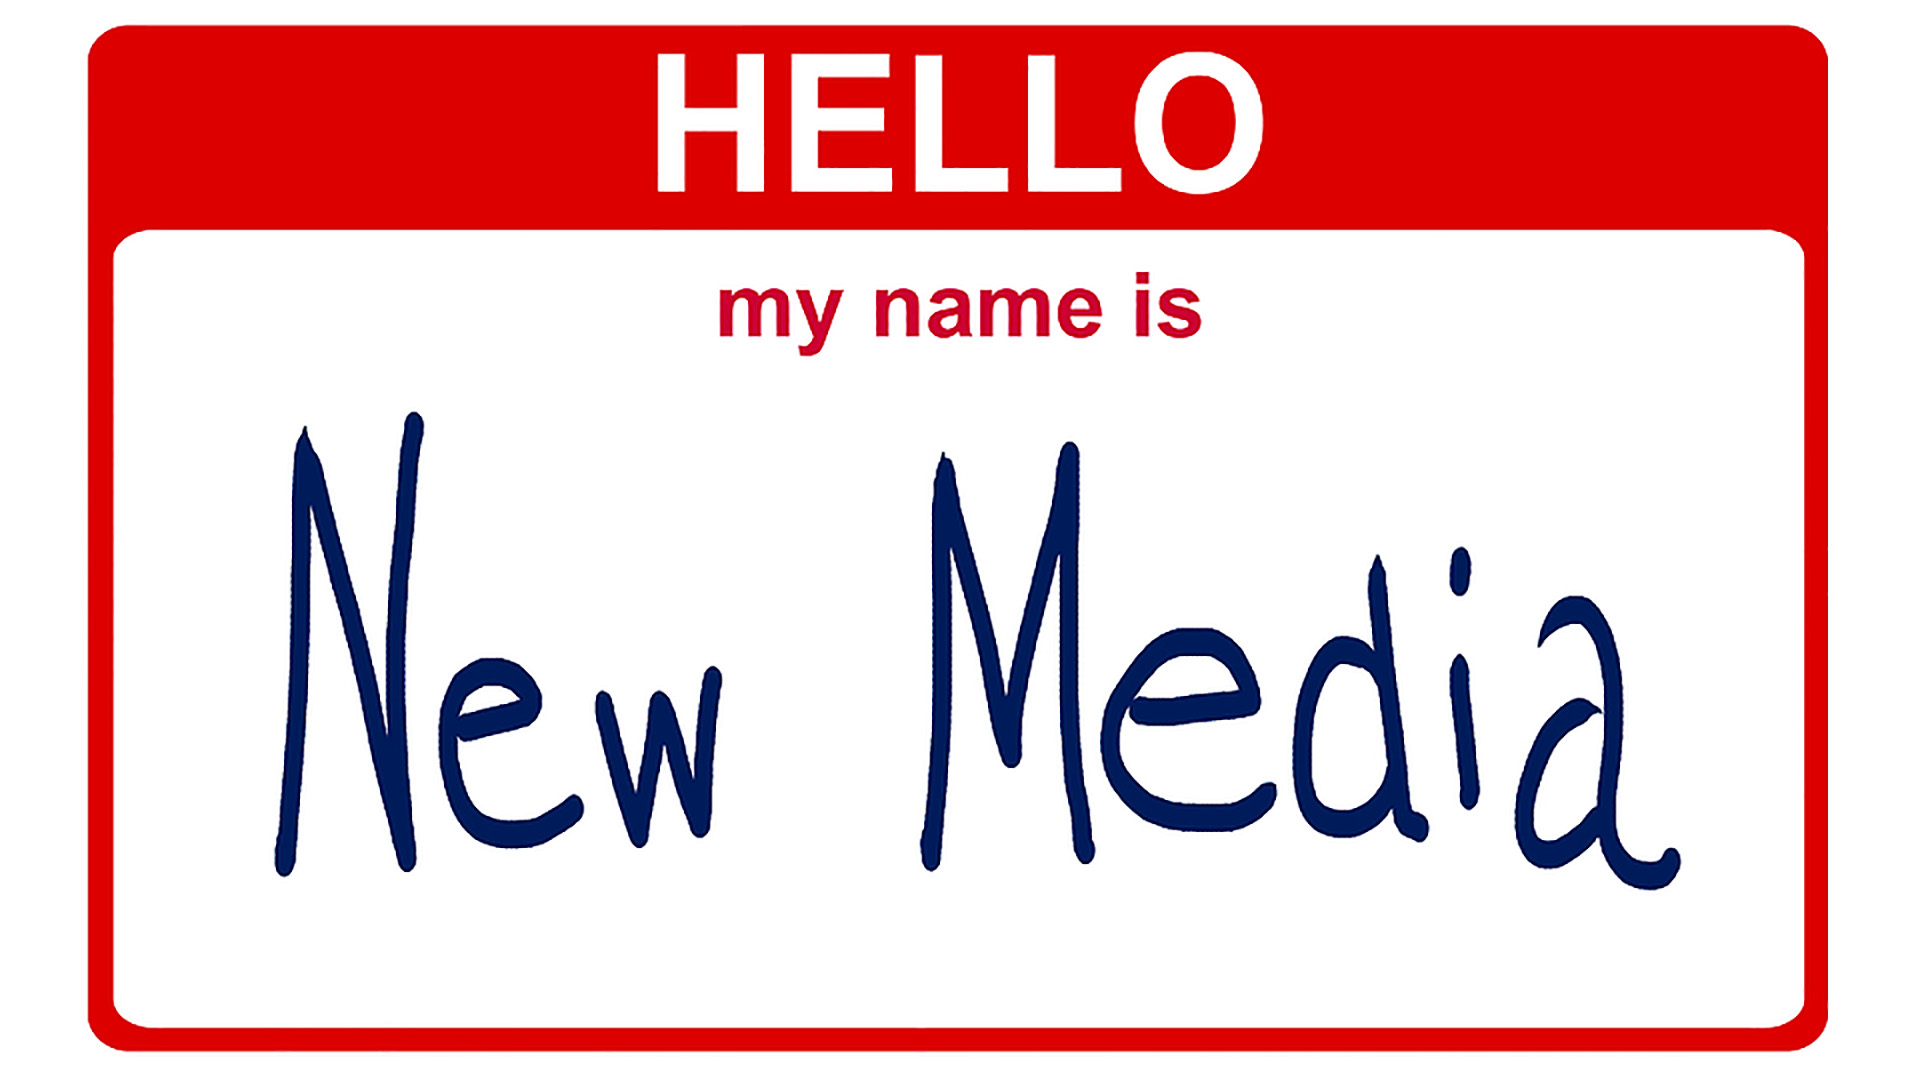 a "hello my name is" name tag, with the box being filled by the words "New Media"